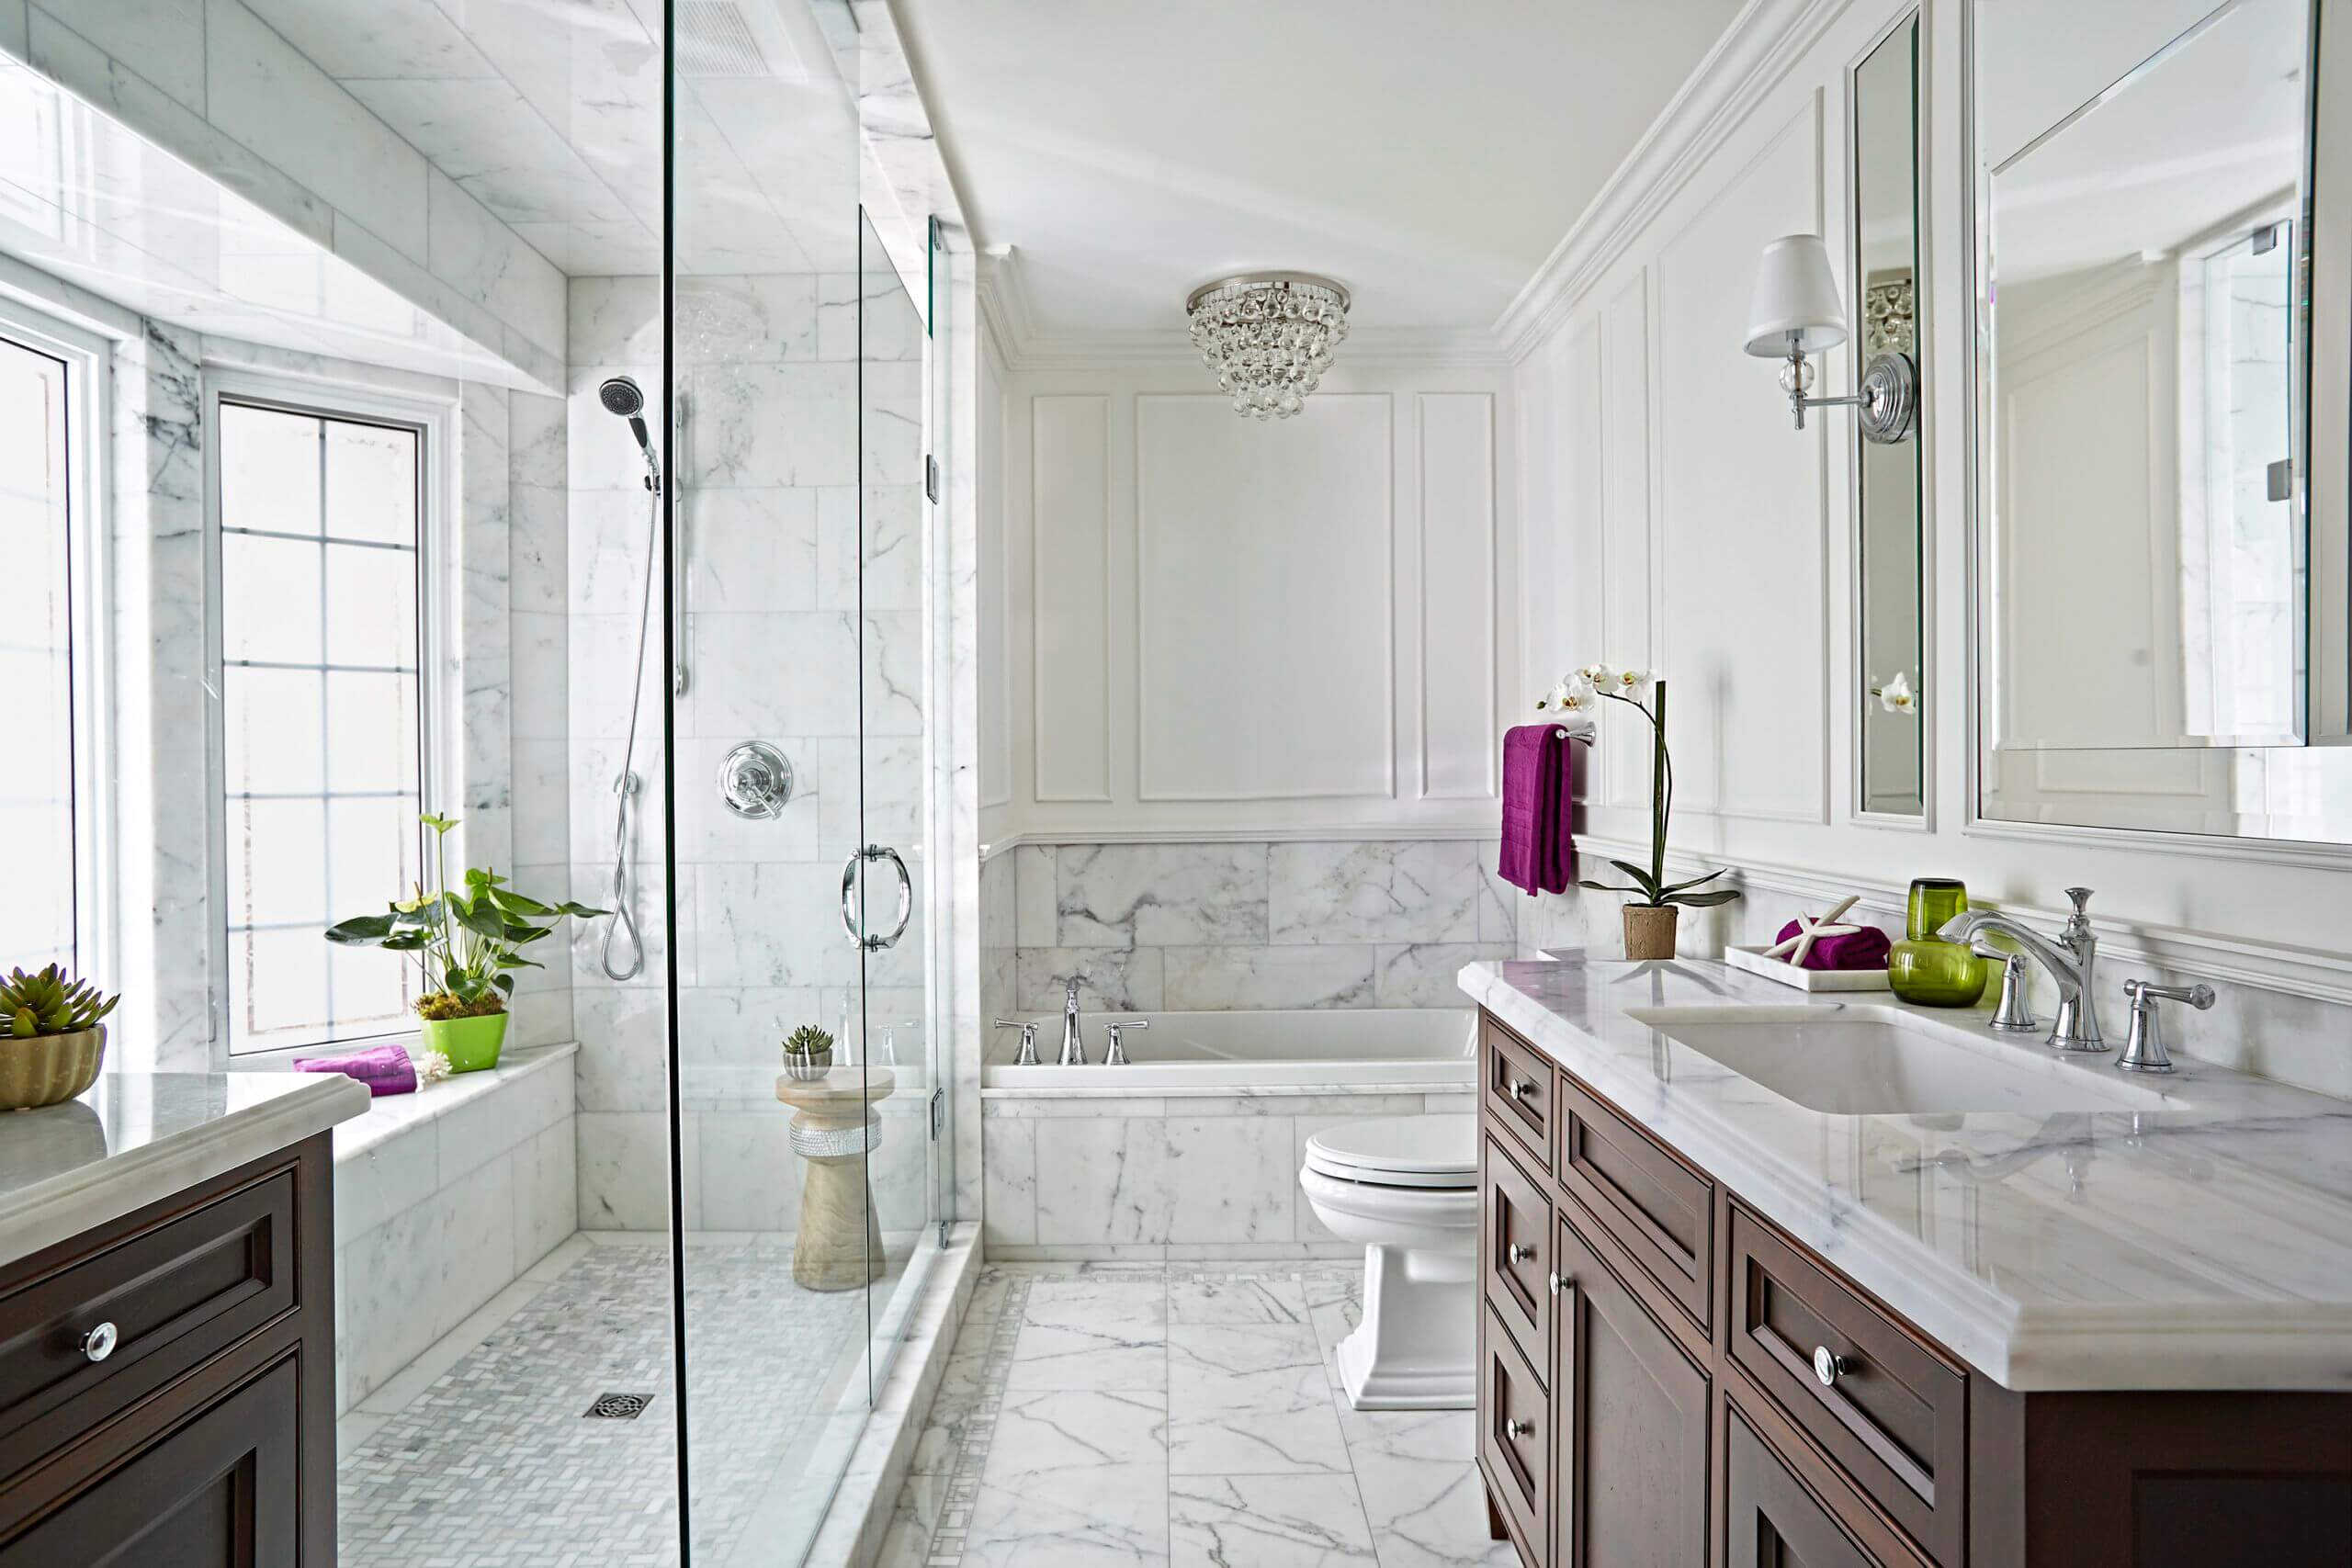 A Step-by-Step Guide to Choosing the Right Toilet for Your Home